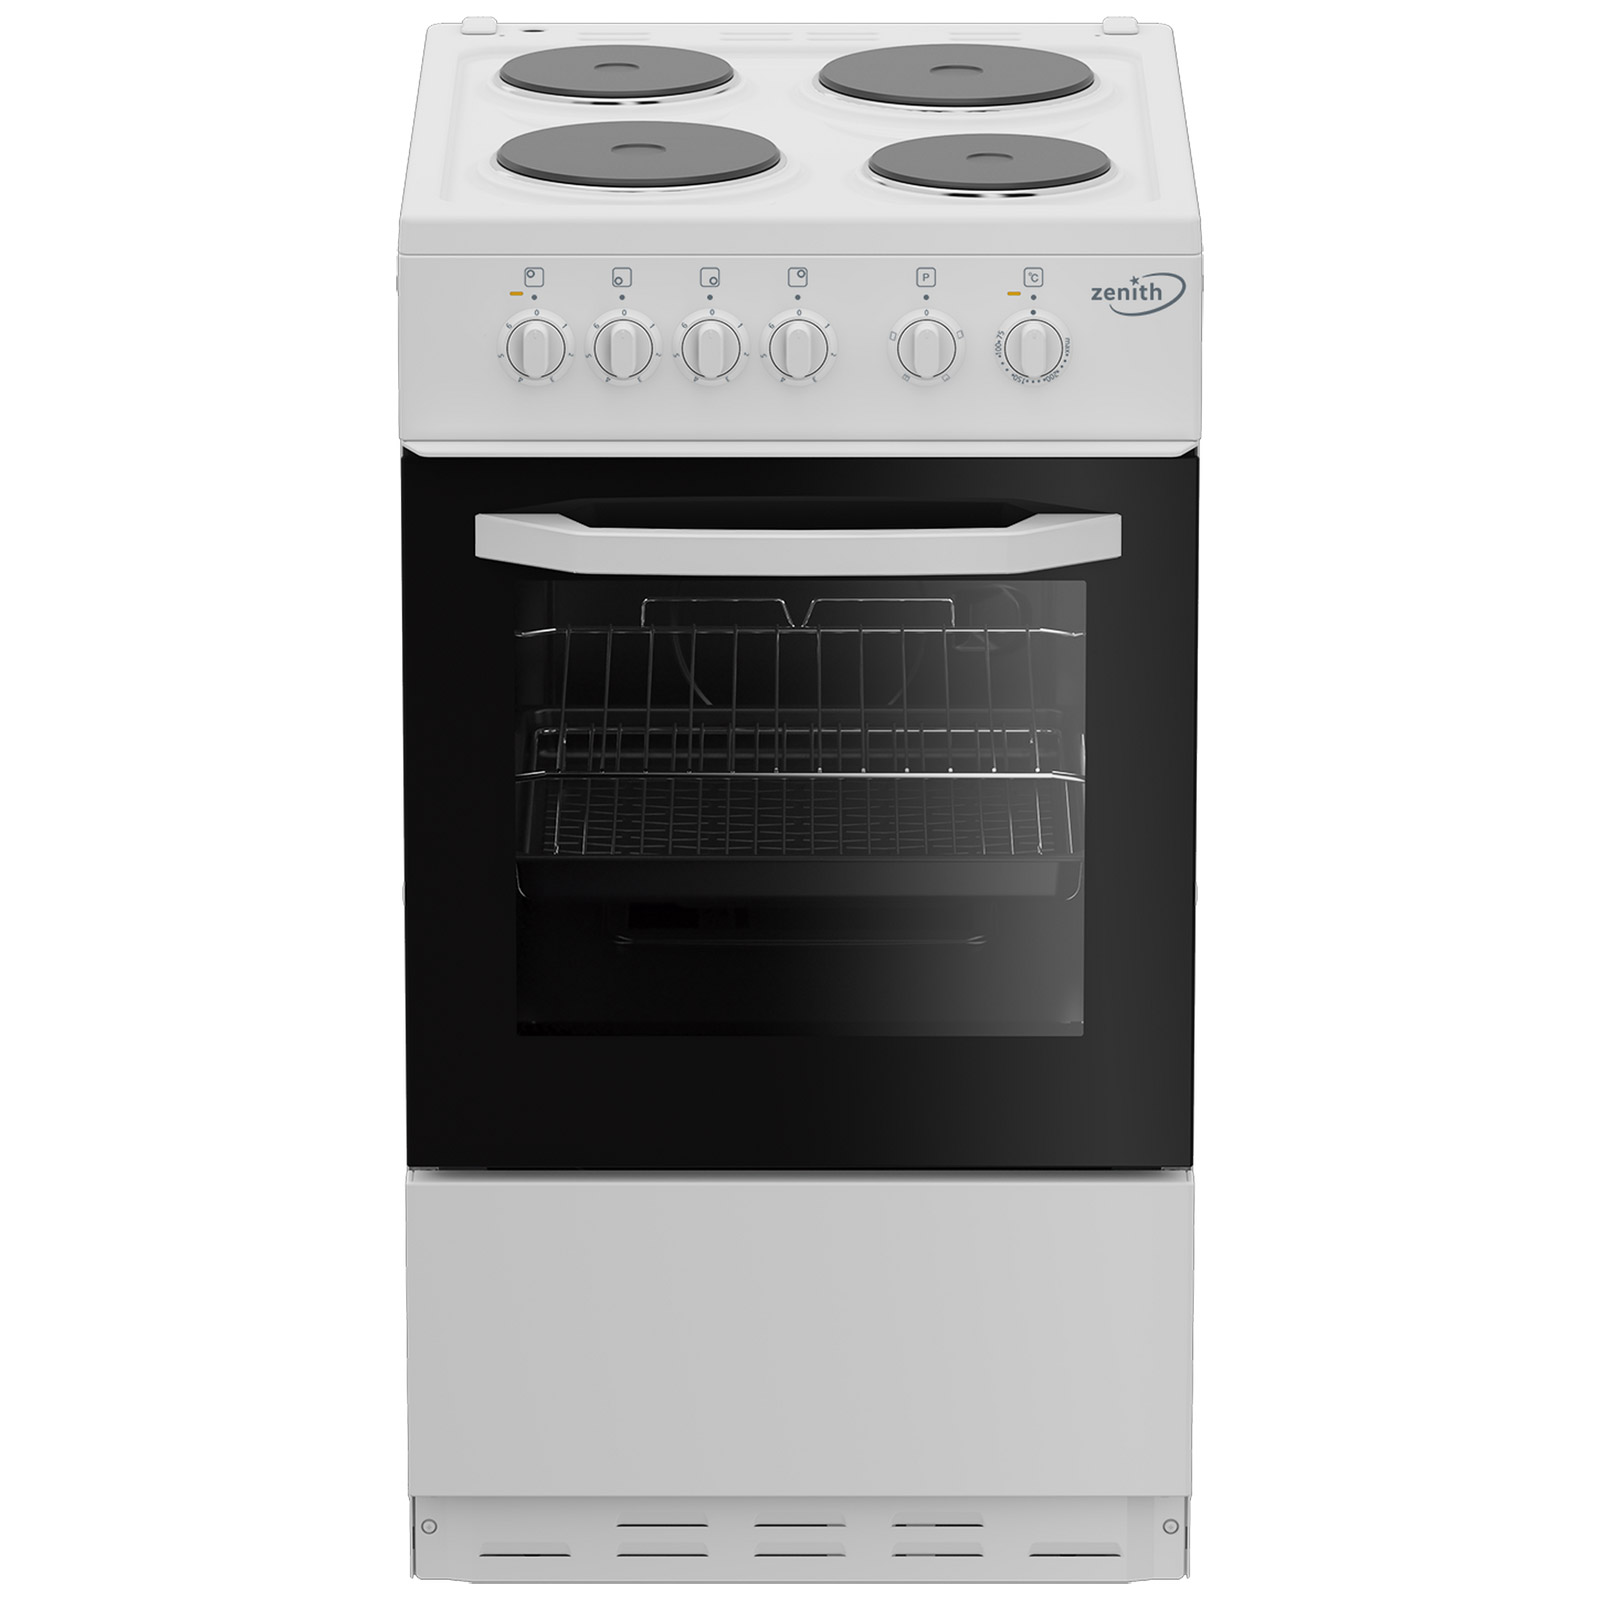 Image of Zenith ZE503W 50cm Single Oven Electric Cooker in White Solid Plate